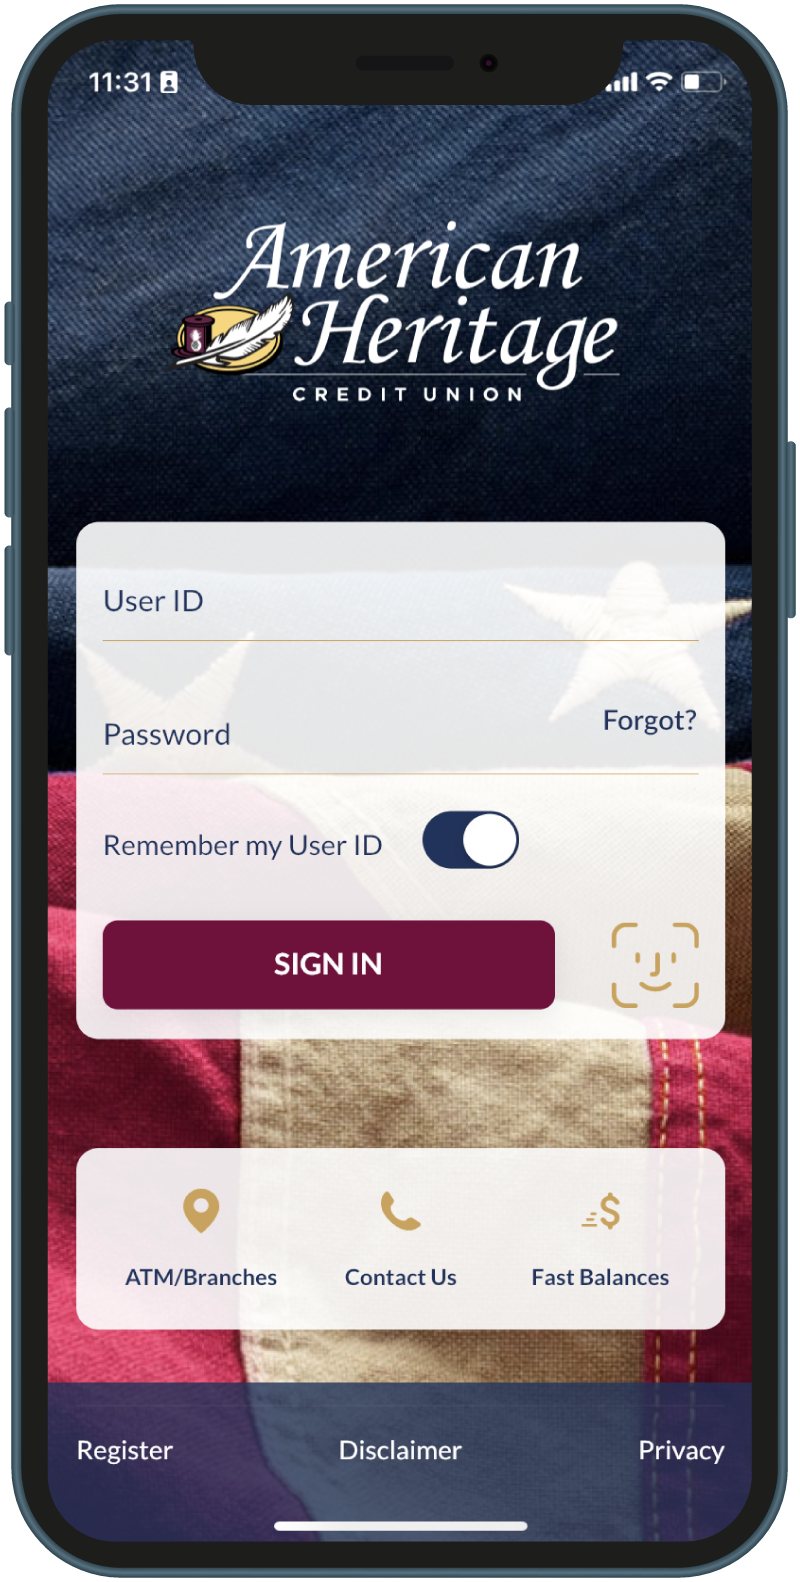 The login screen of the mobile app